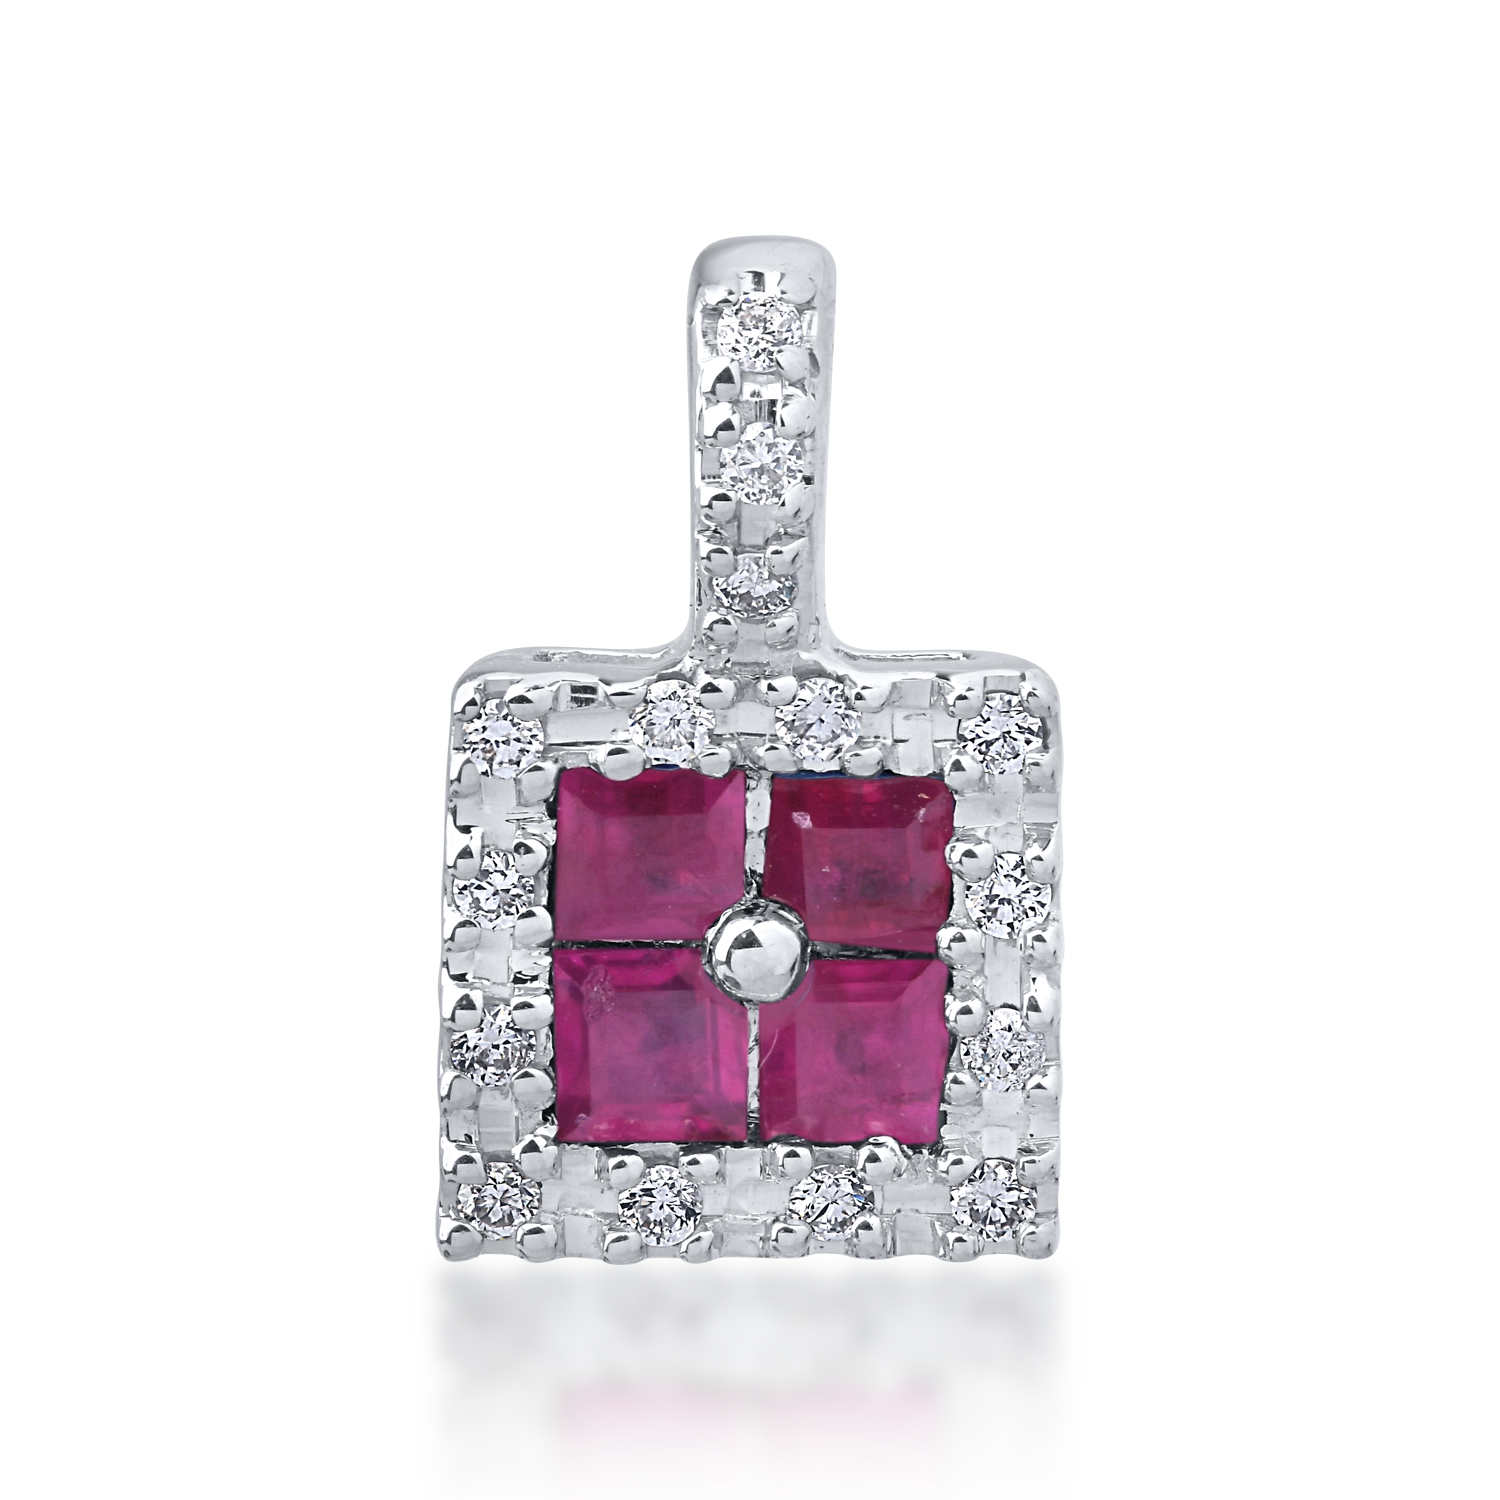 18K white gold pendant with 0.25ct rubies and 0.06ct diamonds